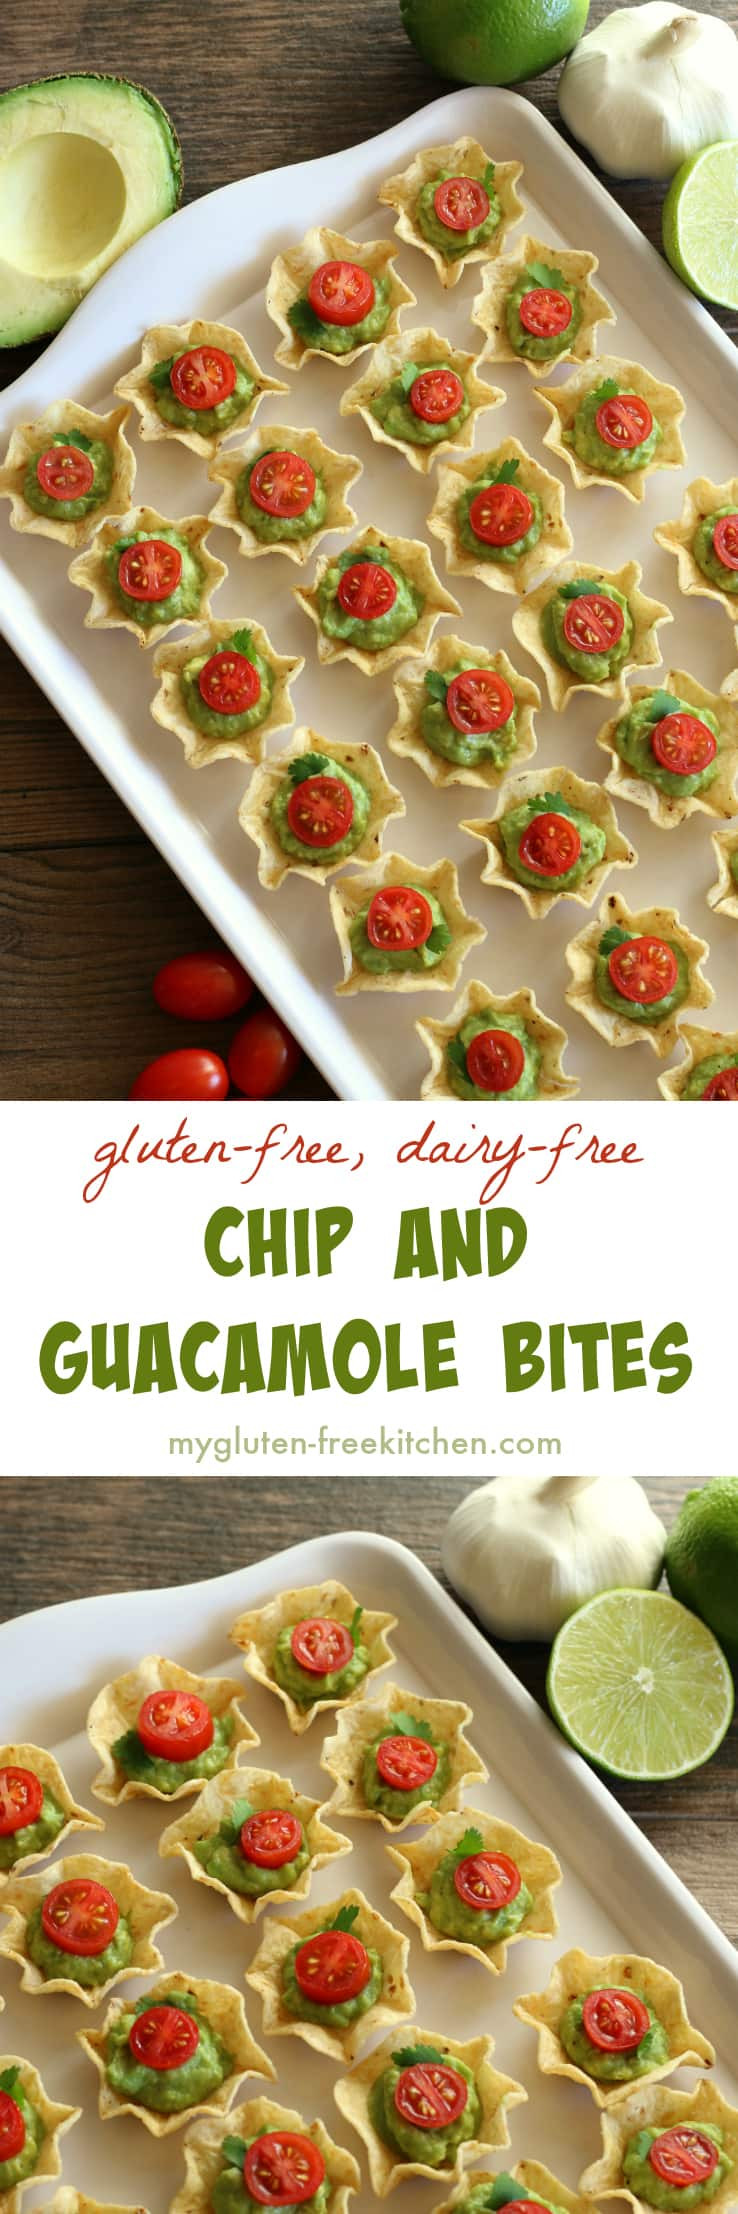 Gluten And Dairy Free Appetizers
 Gluten free Chip and Guacamole Bites